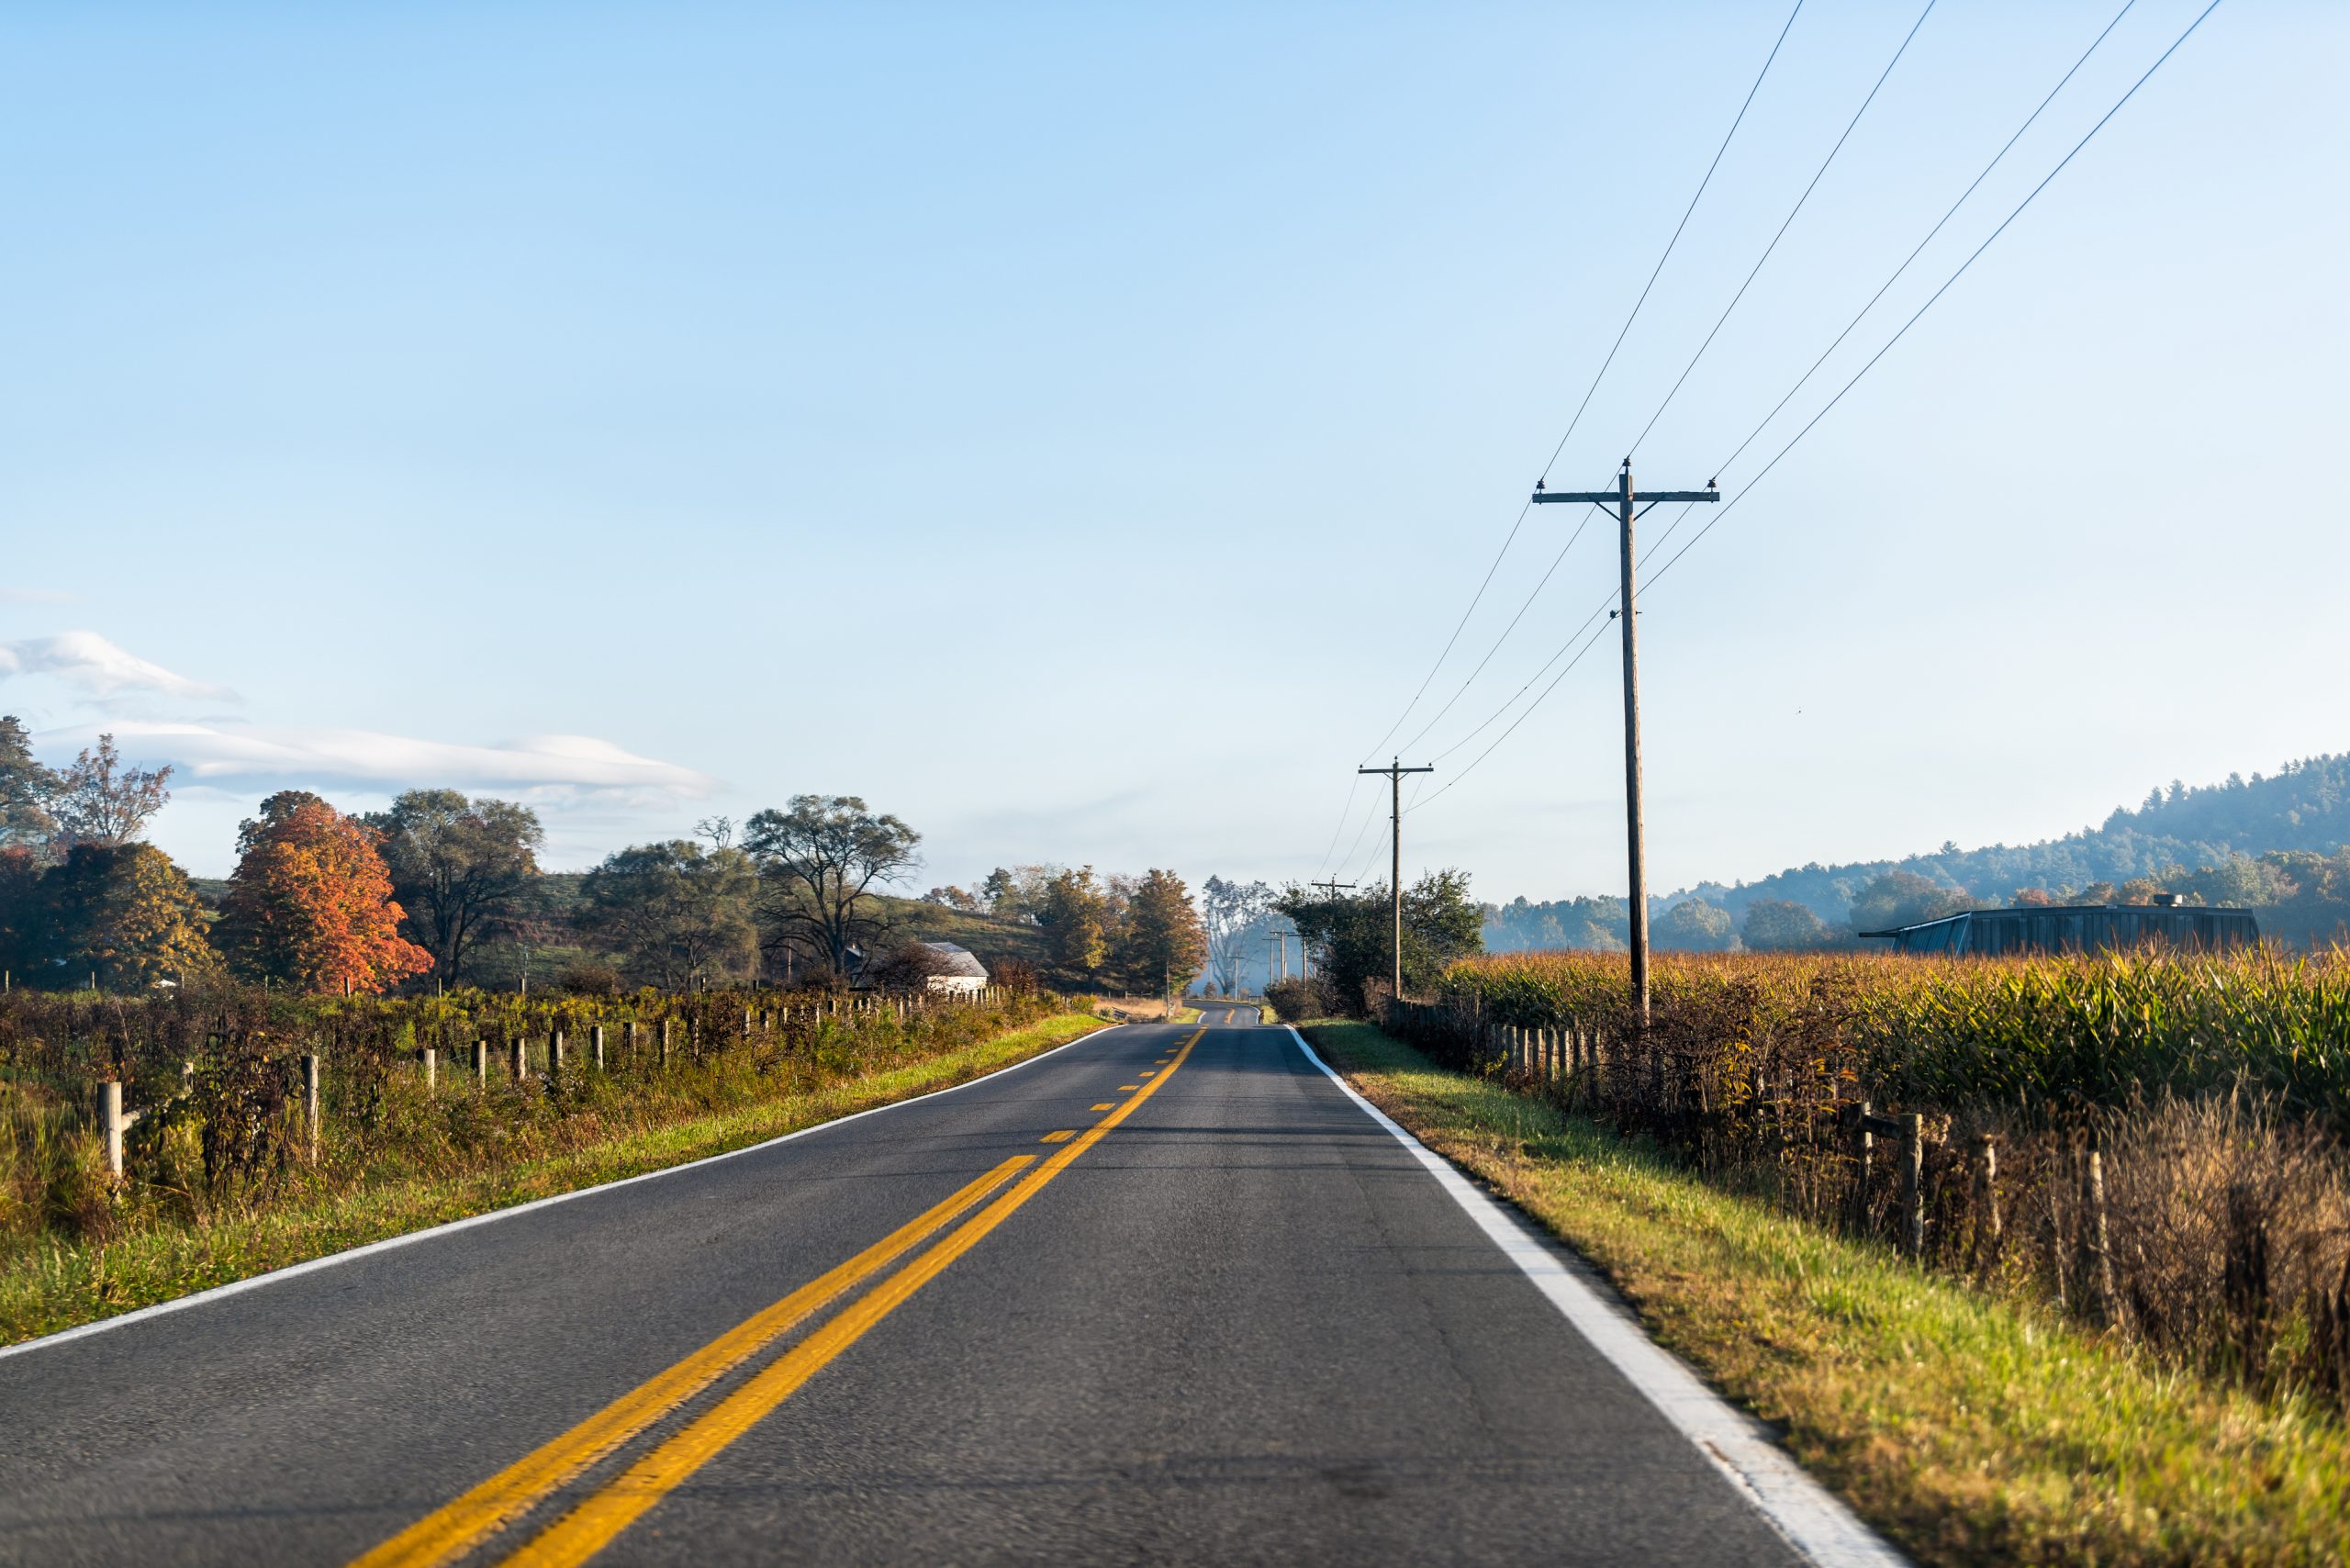 Utility lines run parallel to a two-lane road in rural Virginia, where Starnes Communications provides contracted telecommunications infrastructure through fiber splicing, Network Access points, and line maintenance.